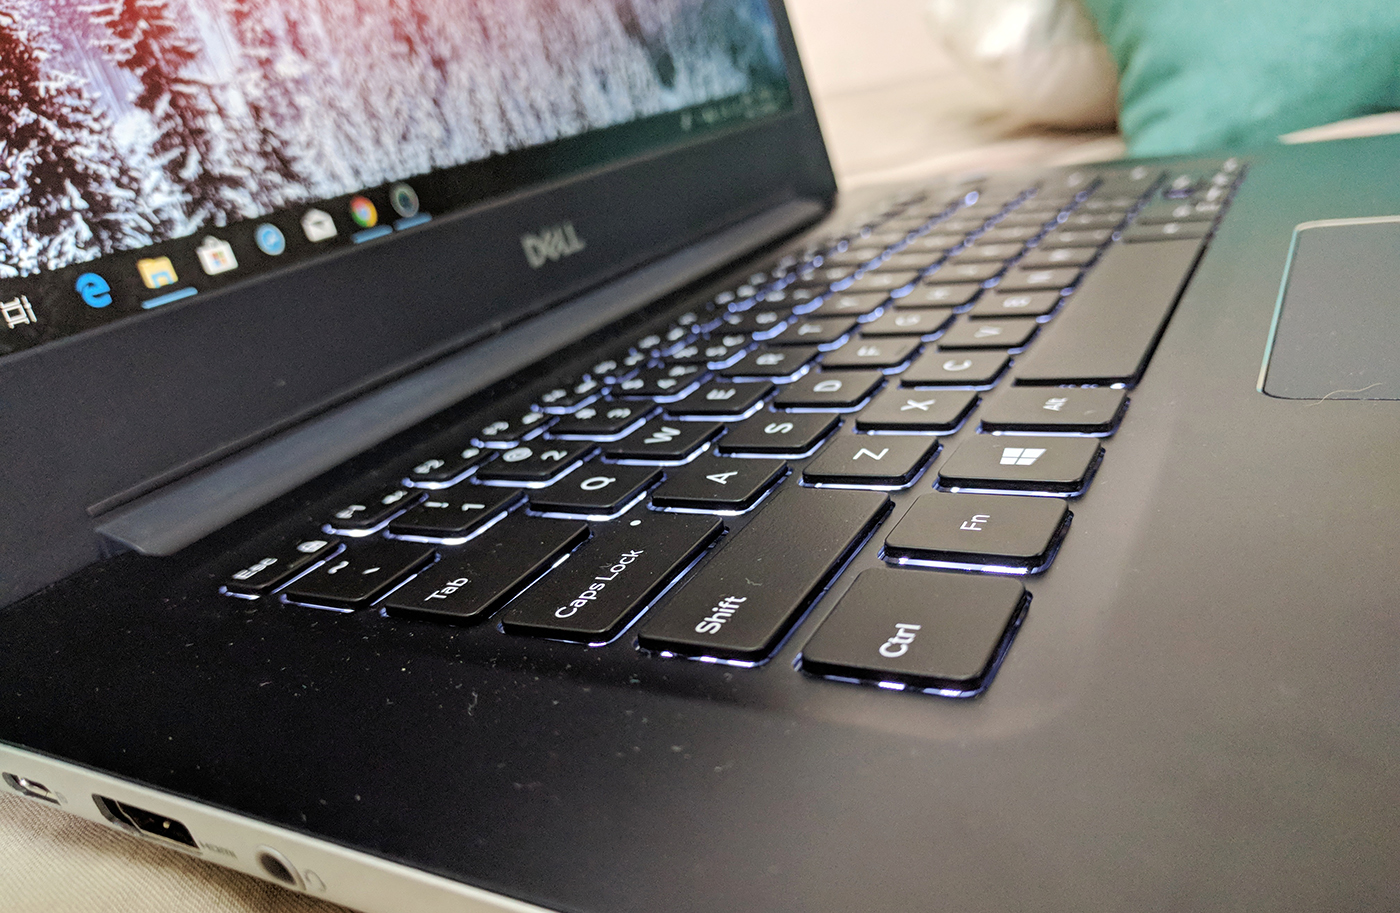 Review: Dell Vostro: A good option for business users